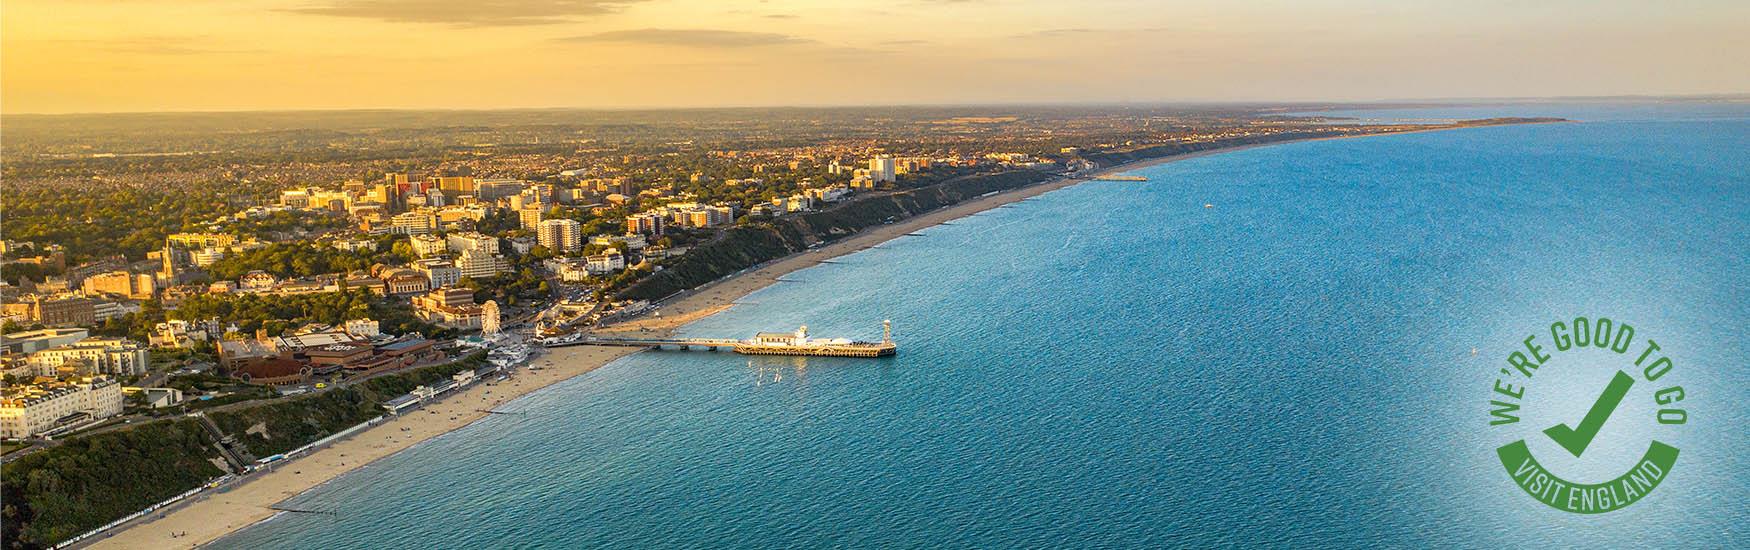 Sunset image of Bournemouth Bay beach and clifftops with green we're good to go logo in the corner